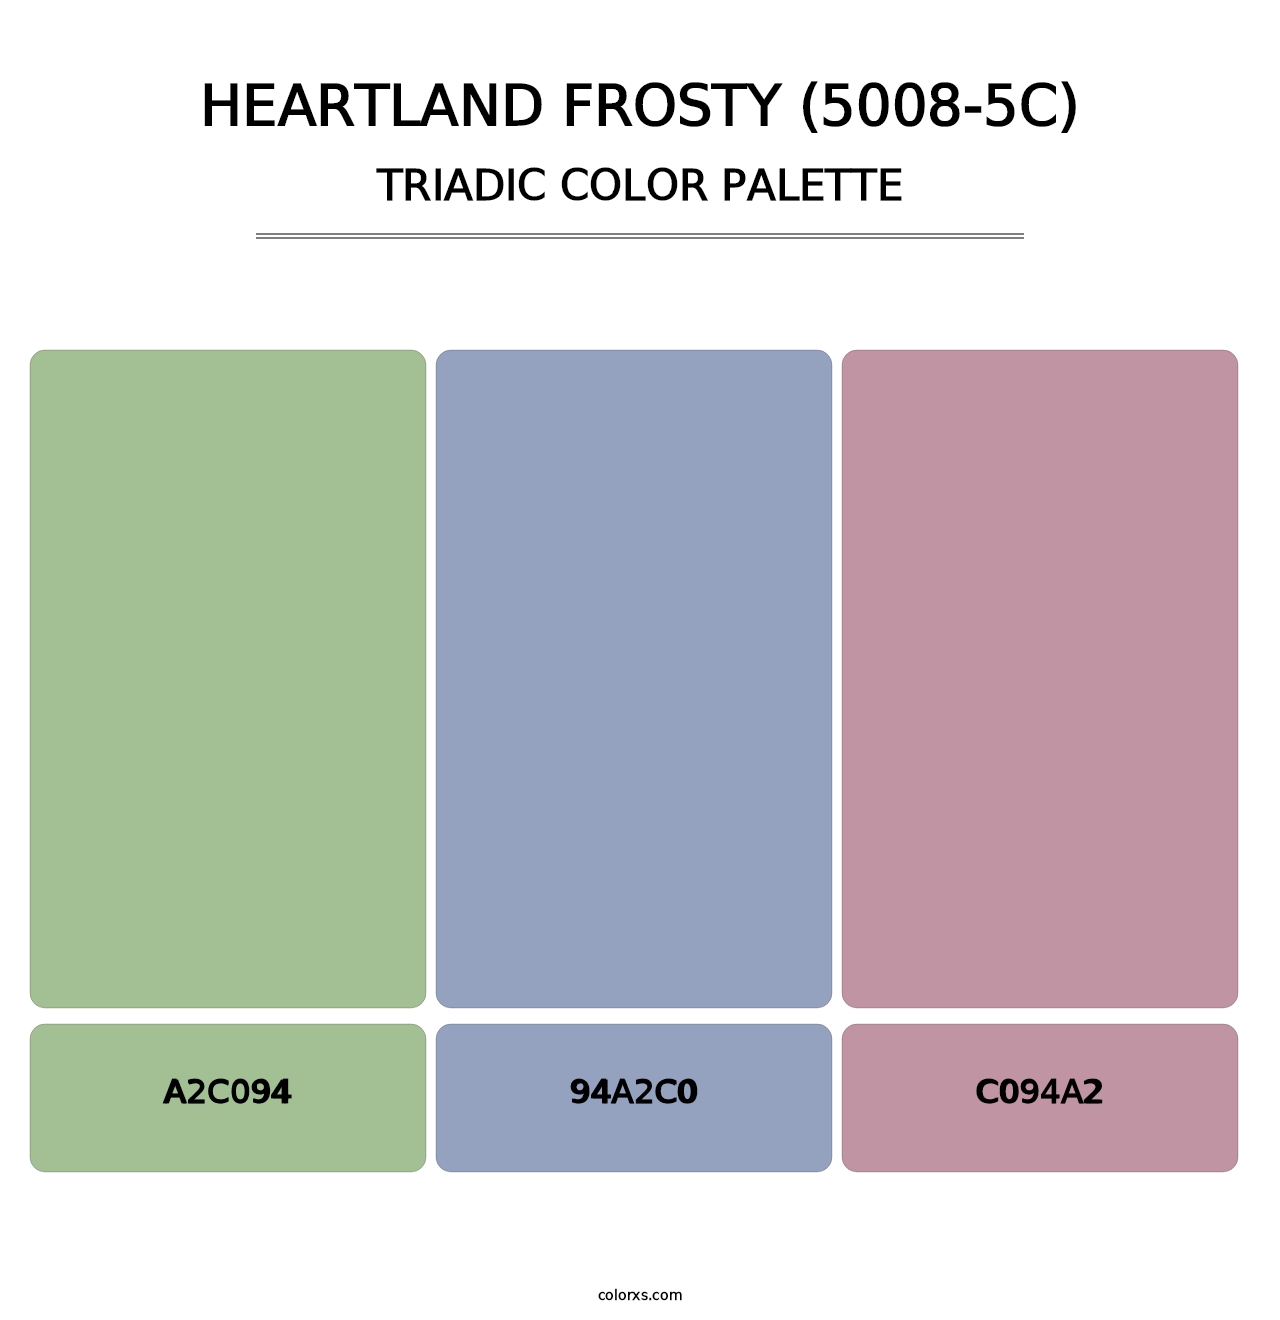 Heartland Frosty (5008-5C) - Triadic Color Palette